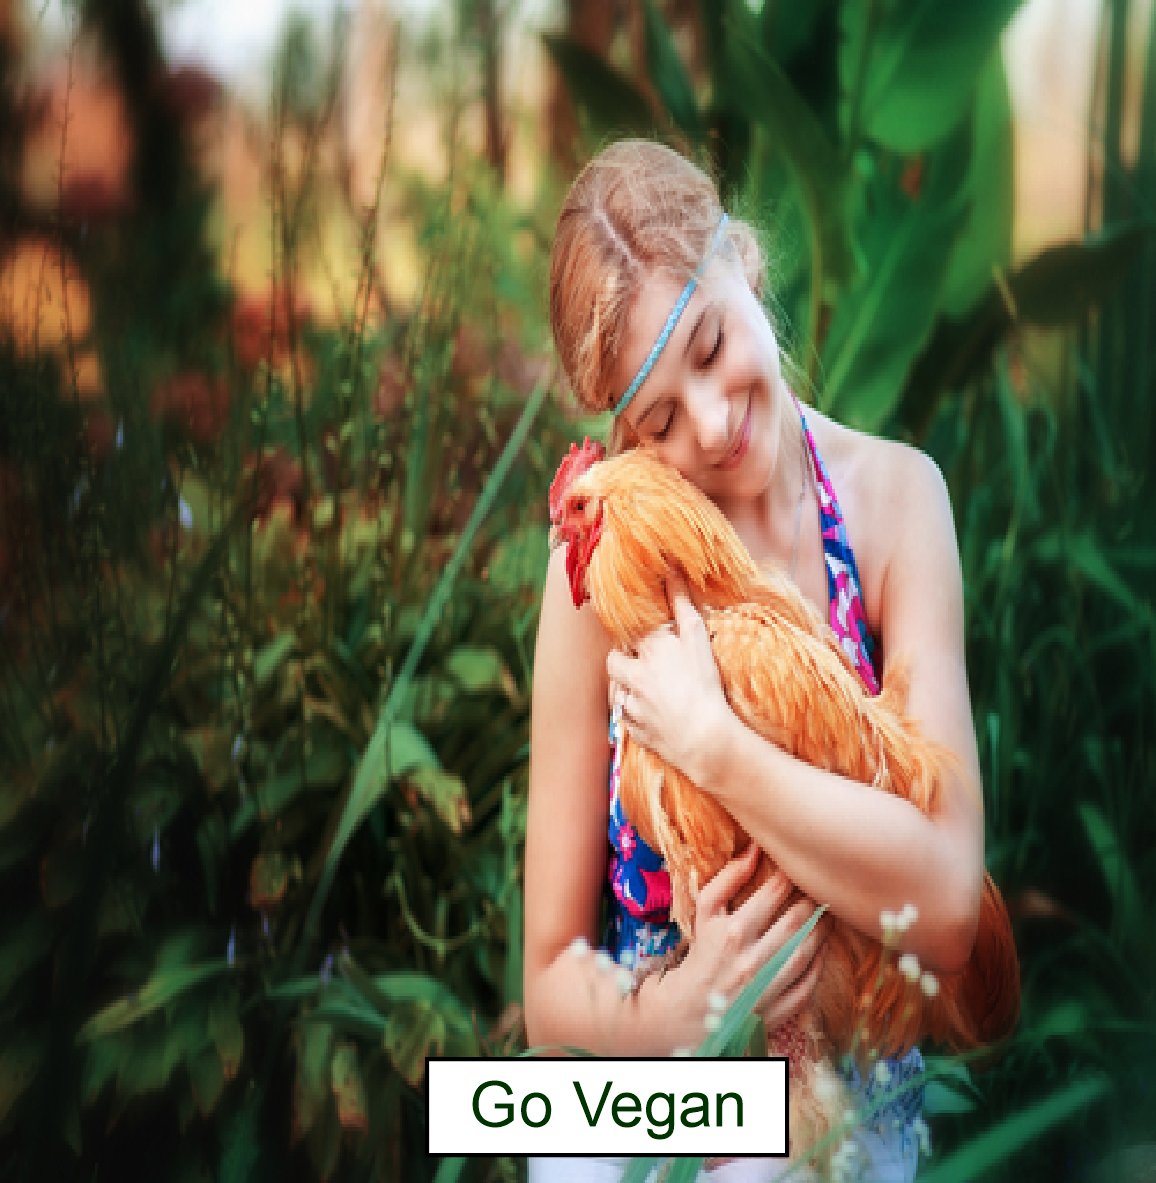 Whether they are a dog or a chicken, be kind to all kinds. Choose plant based.

#bekindtoallkinds #allcreaturesgreatandsmall #friendsnotfood #kindnessiscool #compassion #genz #kindness #goveganfortheanimals #choosekindness #bethechangeyouwanttosee